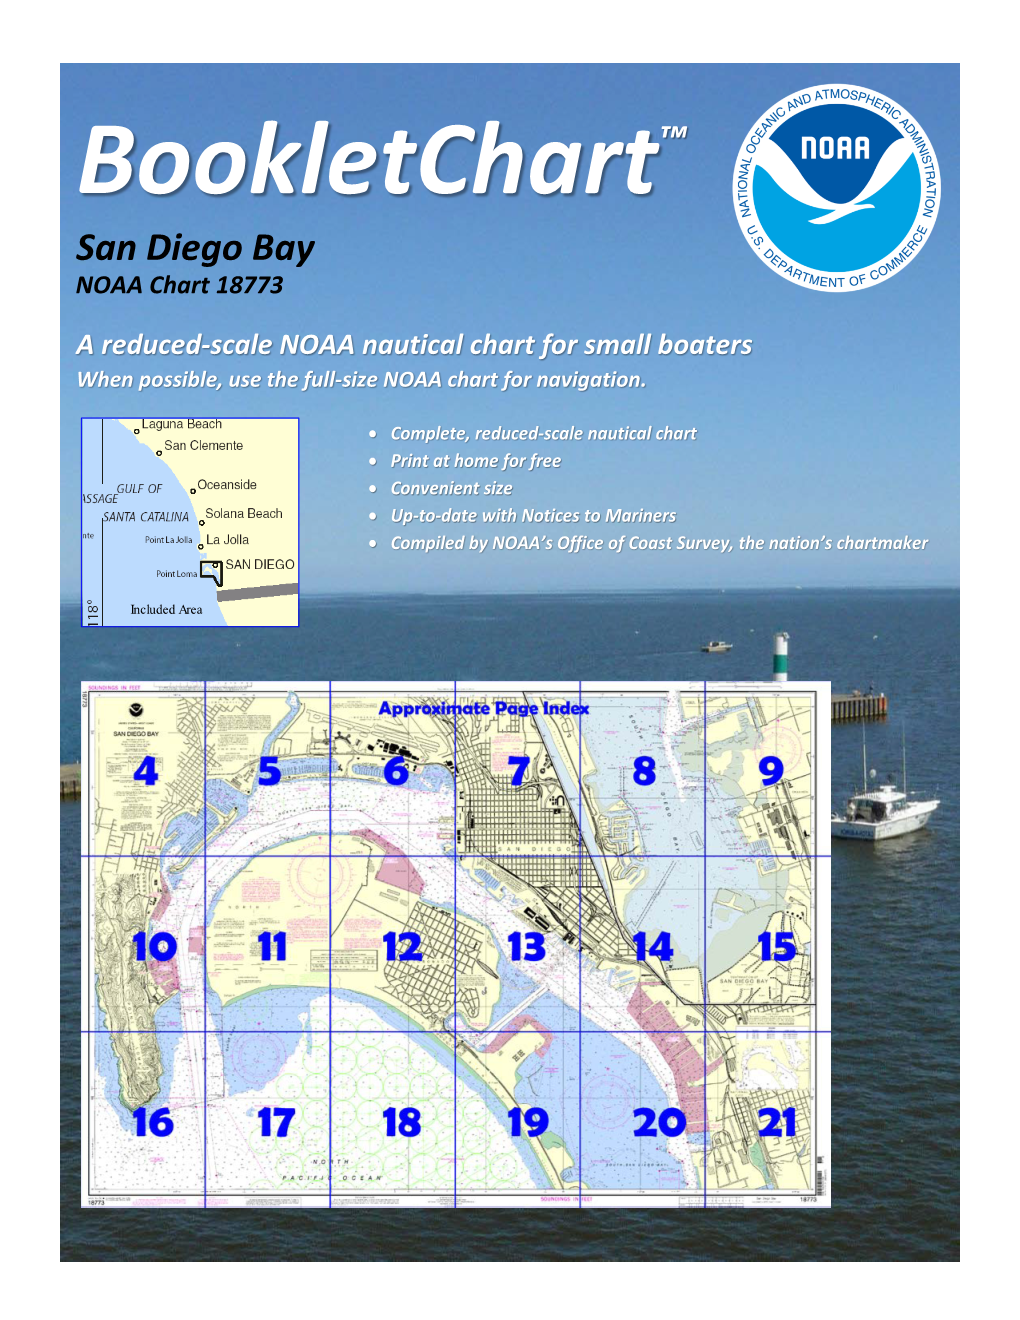 Bookletchart™ San Diego Bay NOAA Chart 18773 a Reduced-Scale NOAA Nautical Chart for Small Boaters